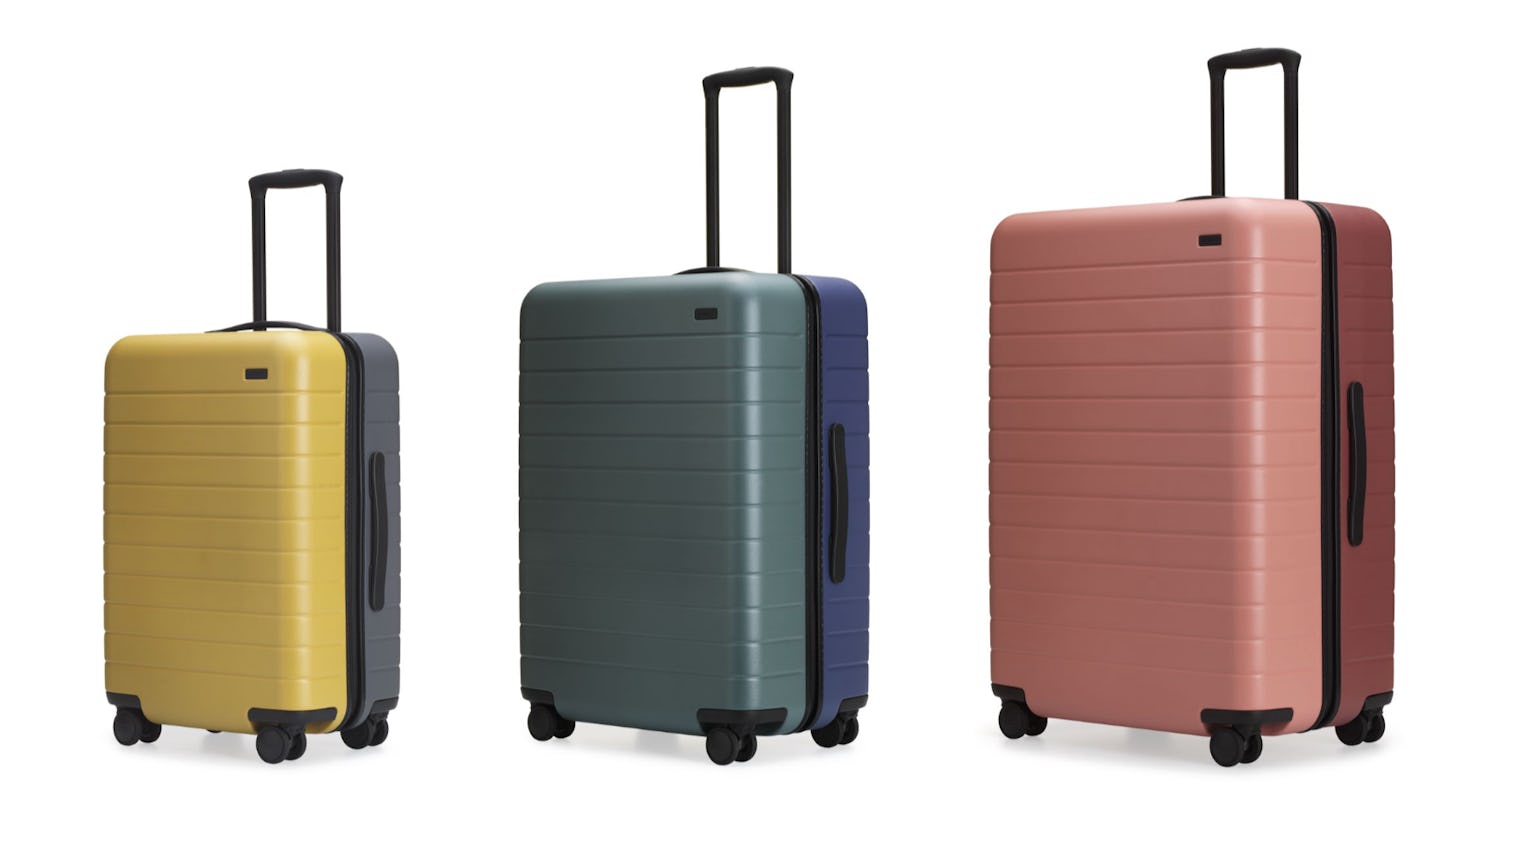 Away Luggage's New Coordinate Collection Is Two-Toned & Super Stylish